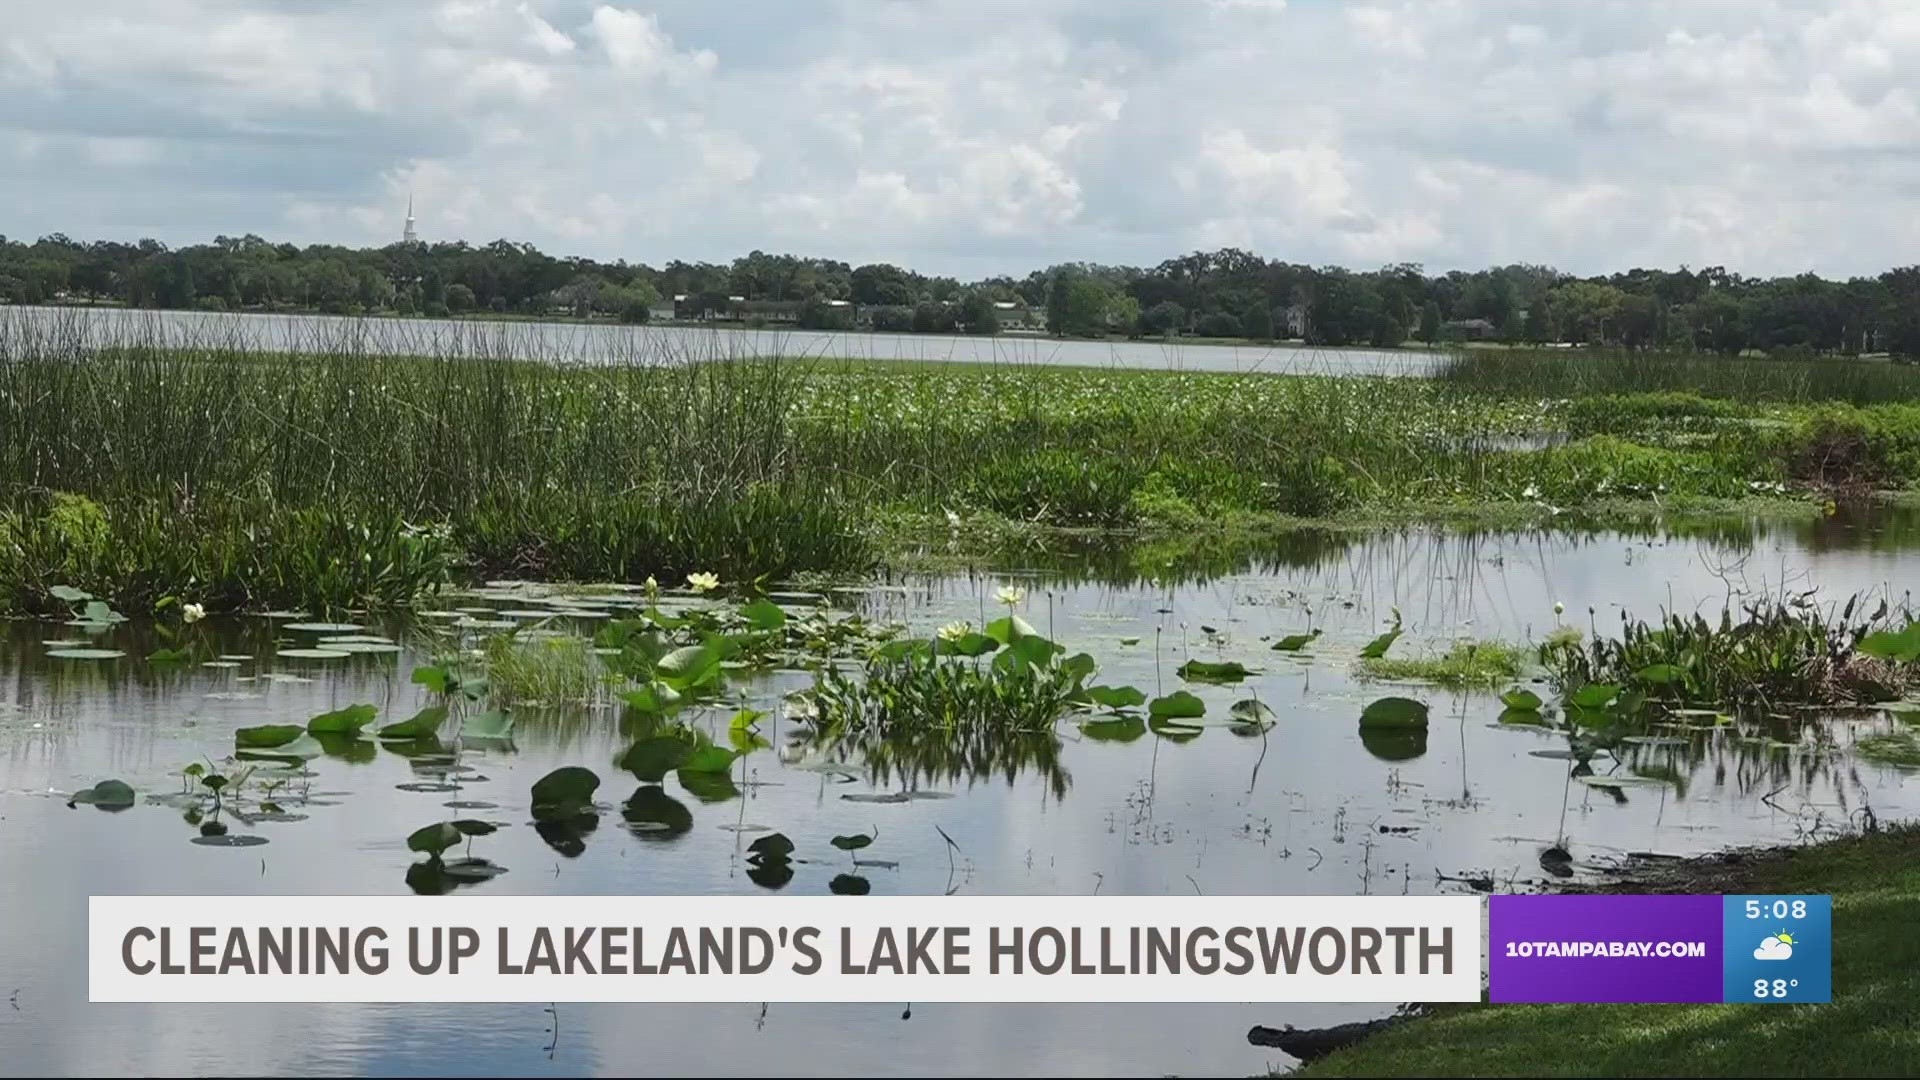 The city is launching a project in a few days to remove excess weeds and vegetation from Lake Hollingsworth.